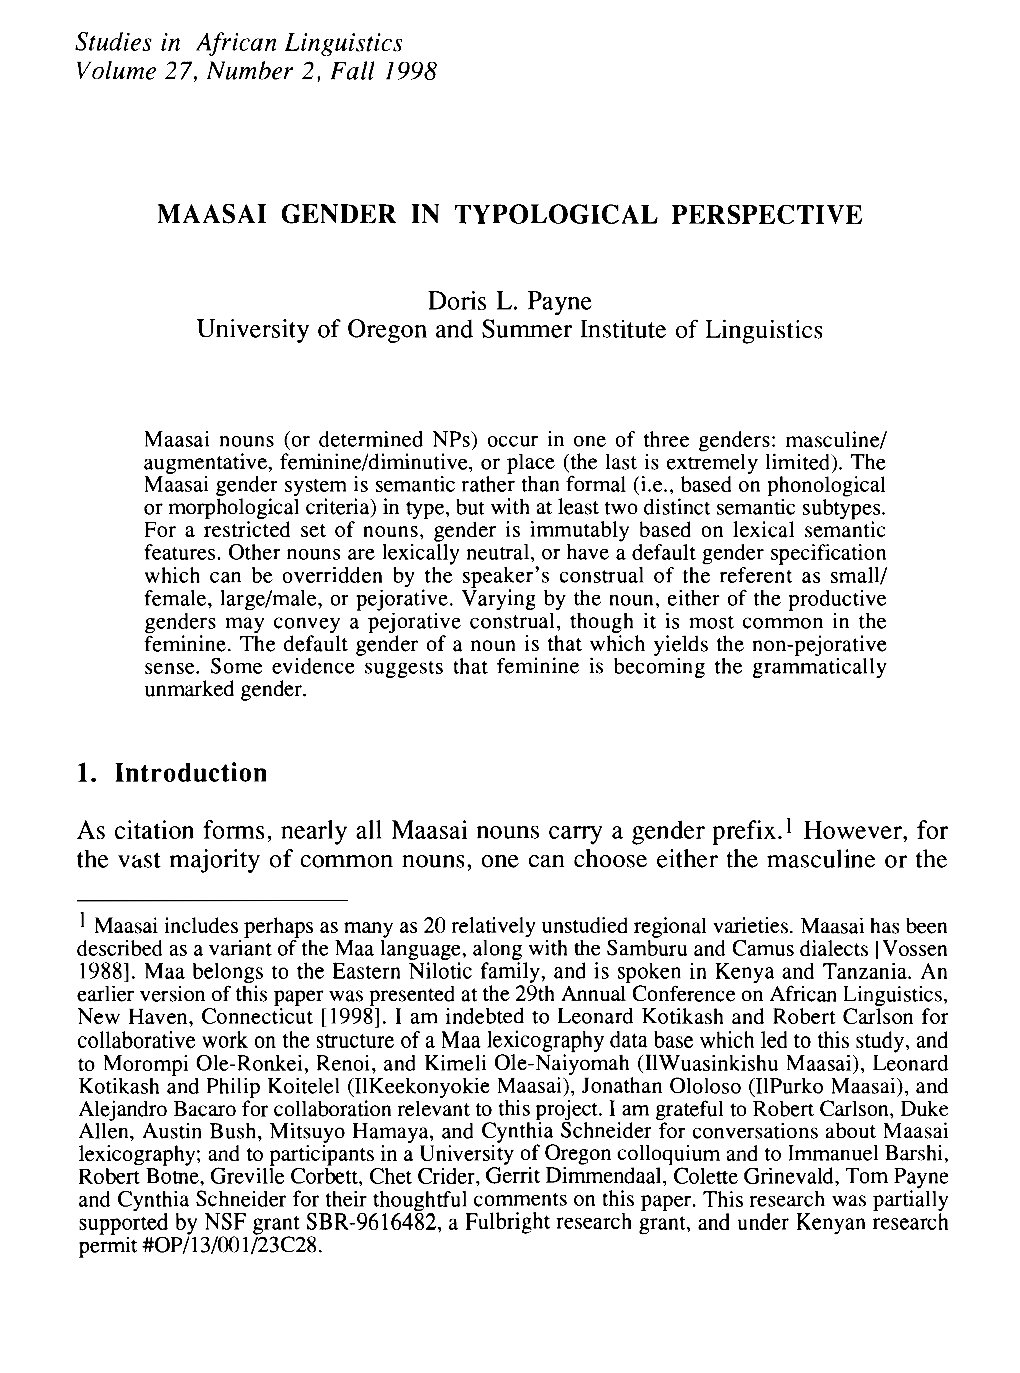 Maasai Gender in Typological Perspective